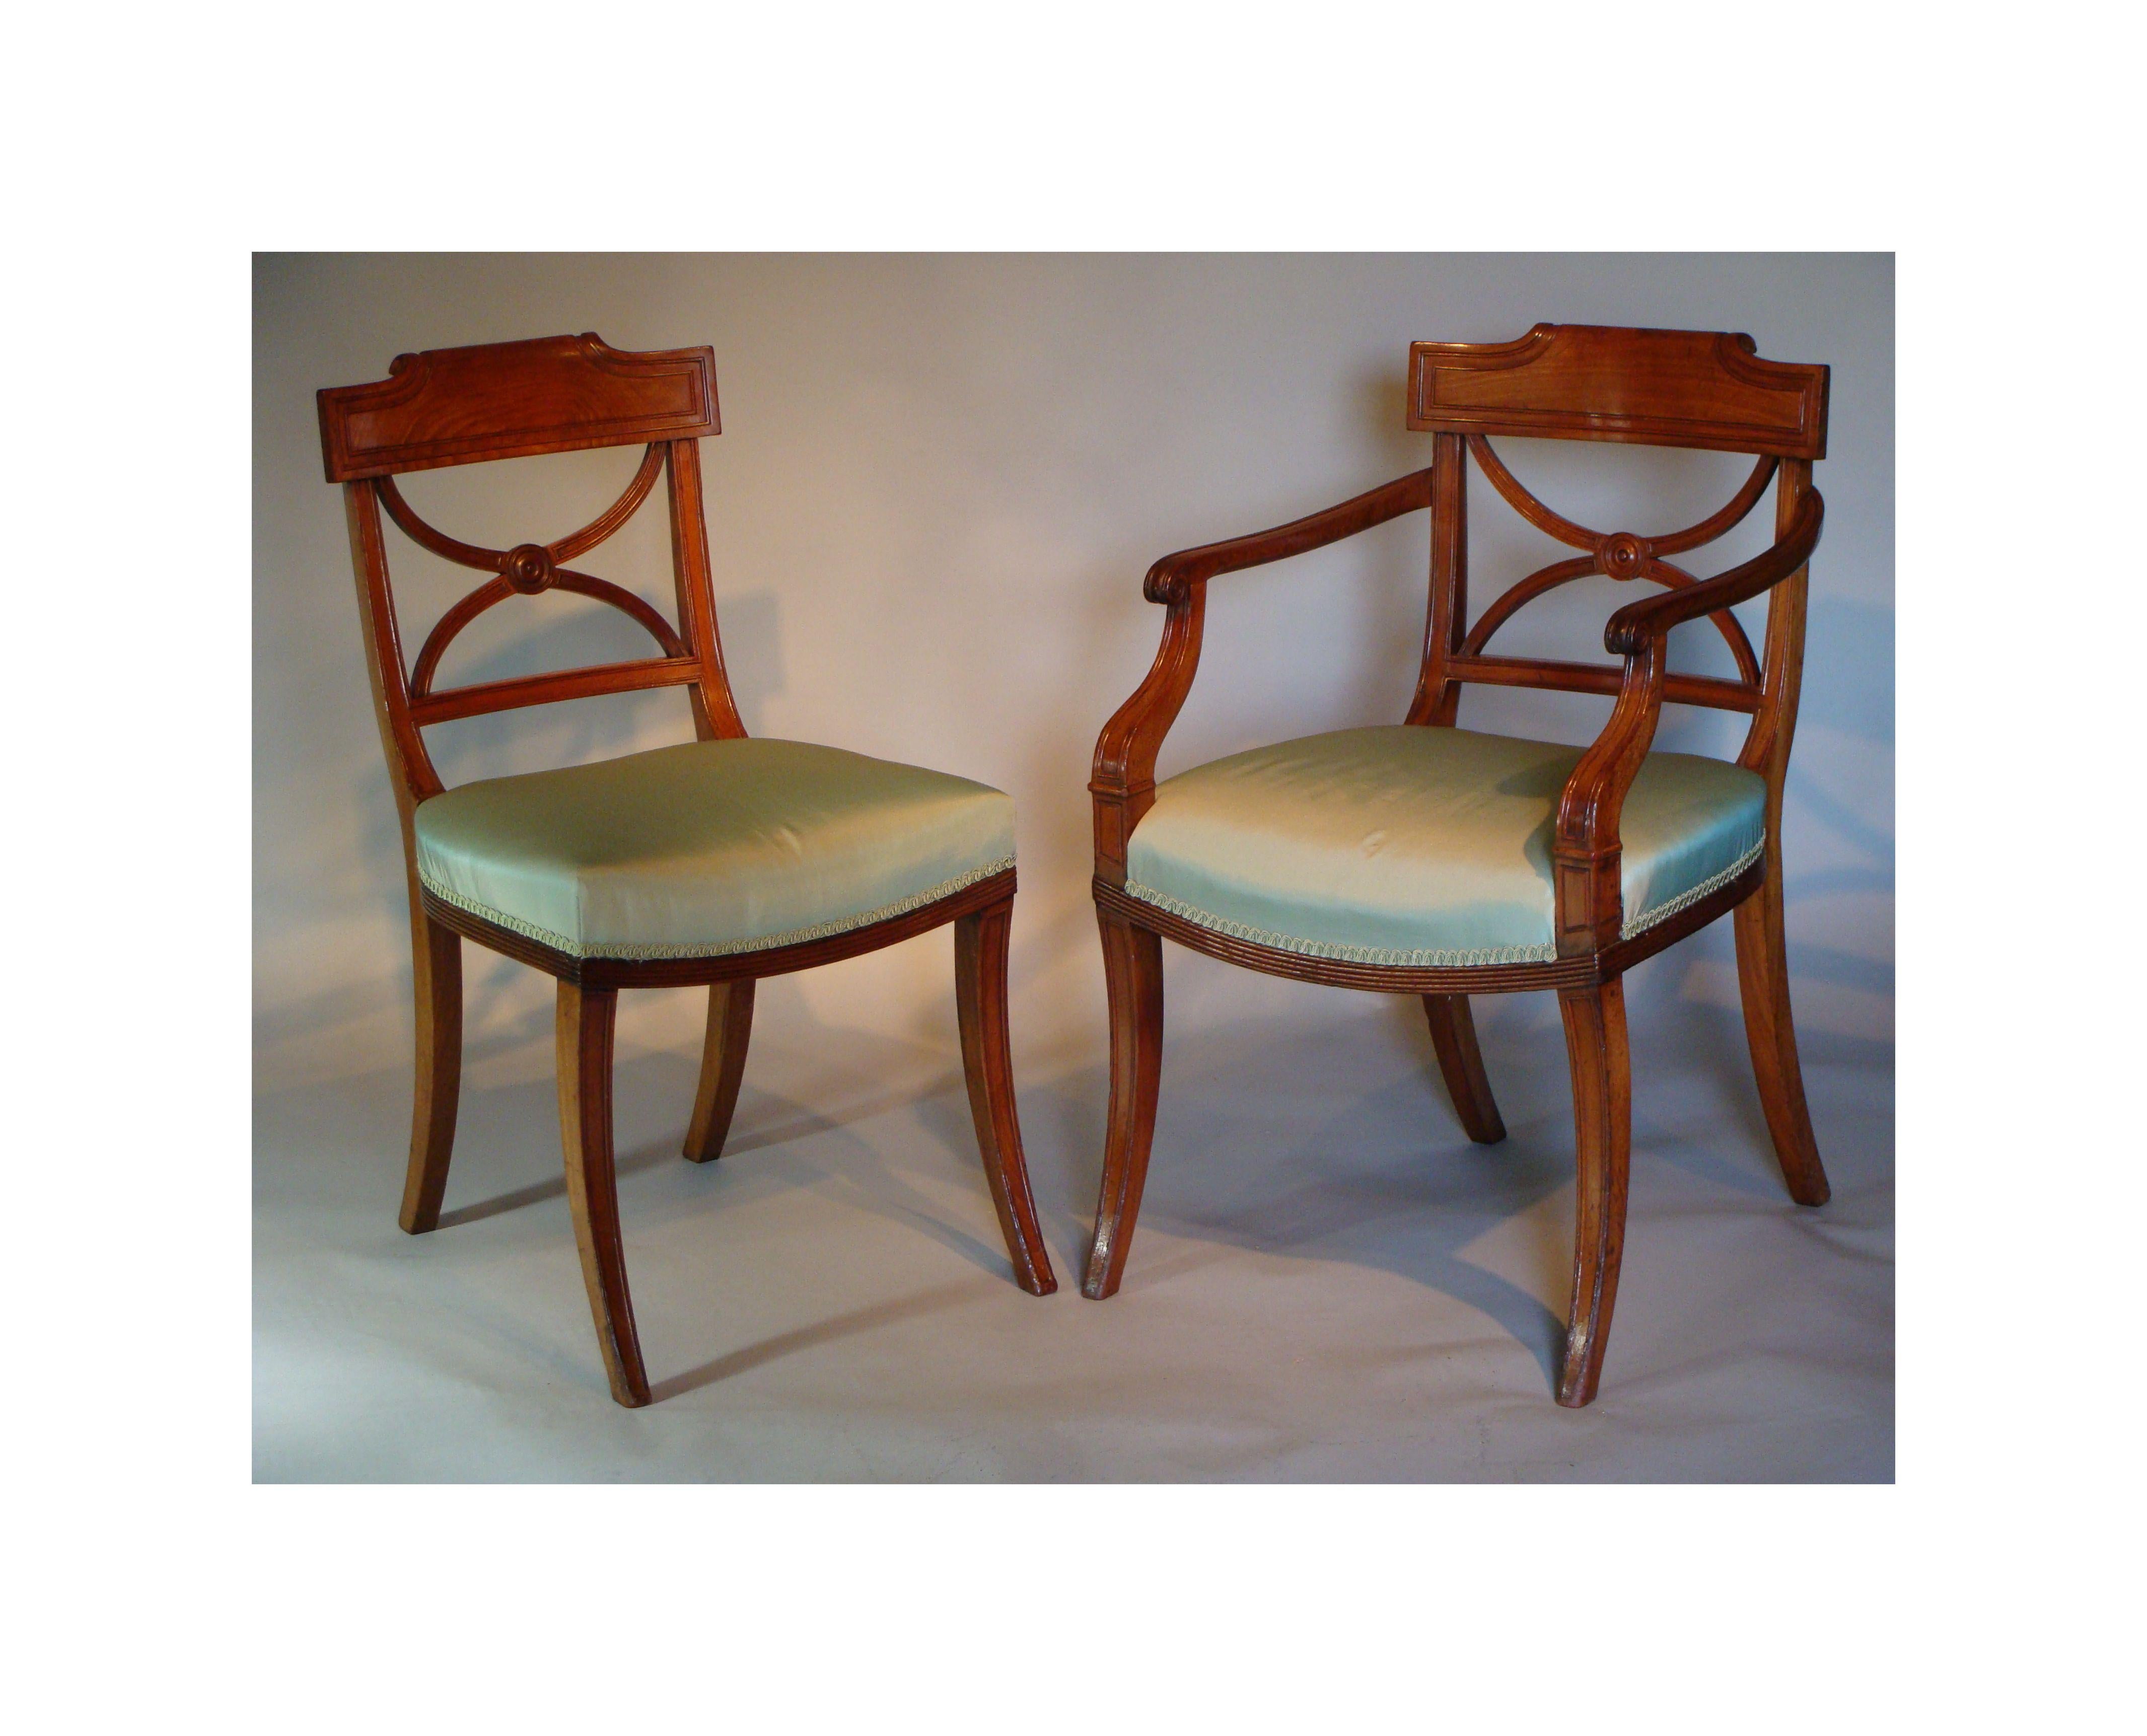 An impressive and rare set of twenty (18 + 2) antique (George lll period) mahogany dining chairs, including a pair of open armchairs. 
Ca 1810.

Of excellent quality, colour and condition.

The carved and moulded frames raised on sabre legs. The